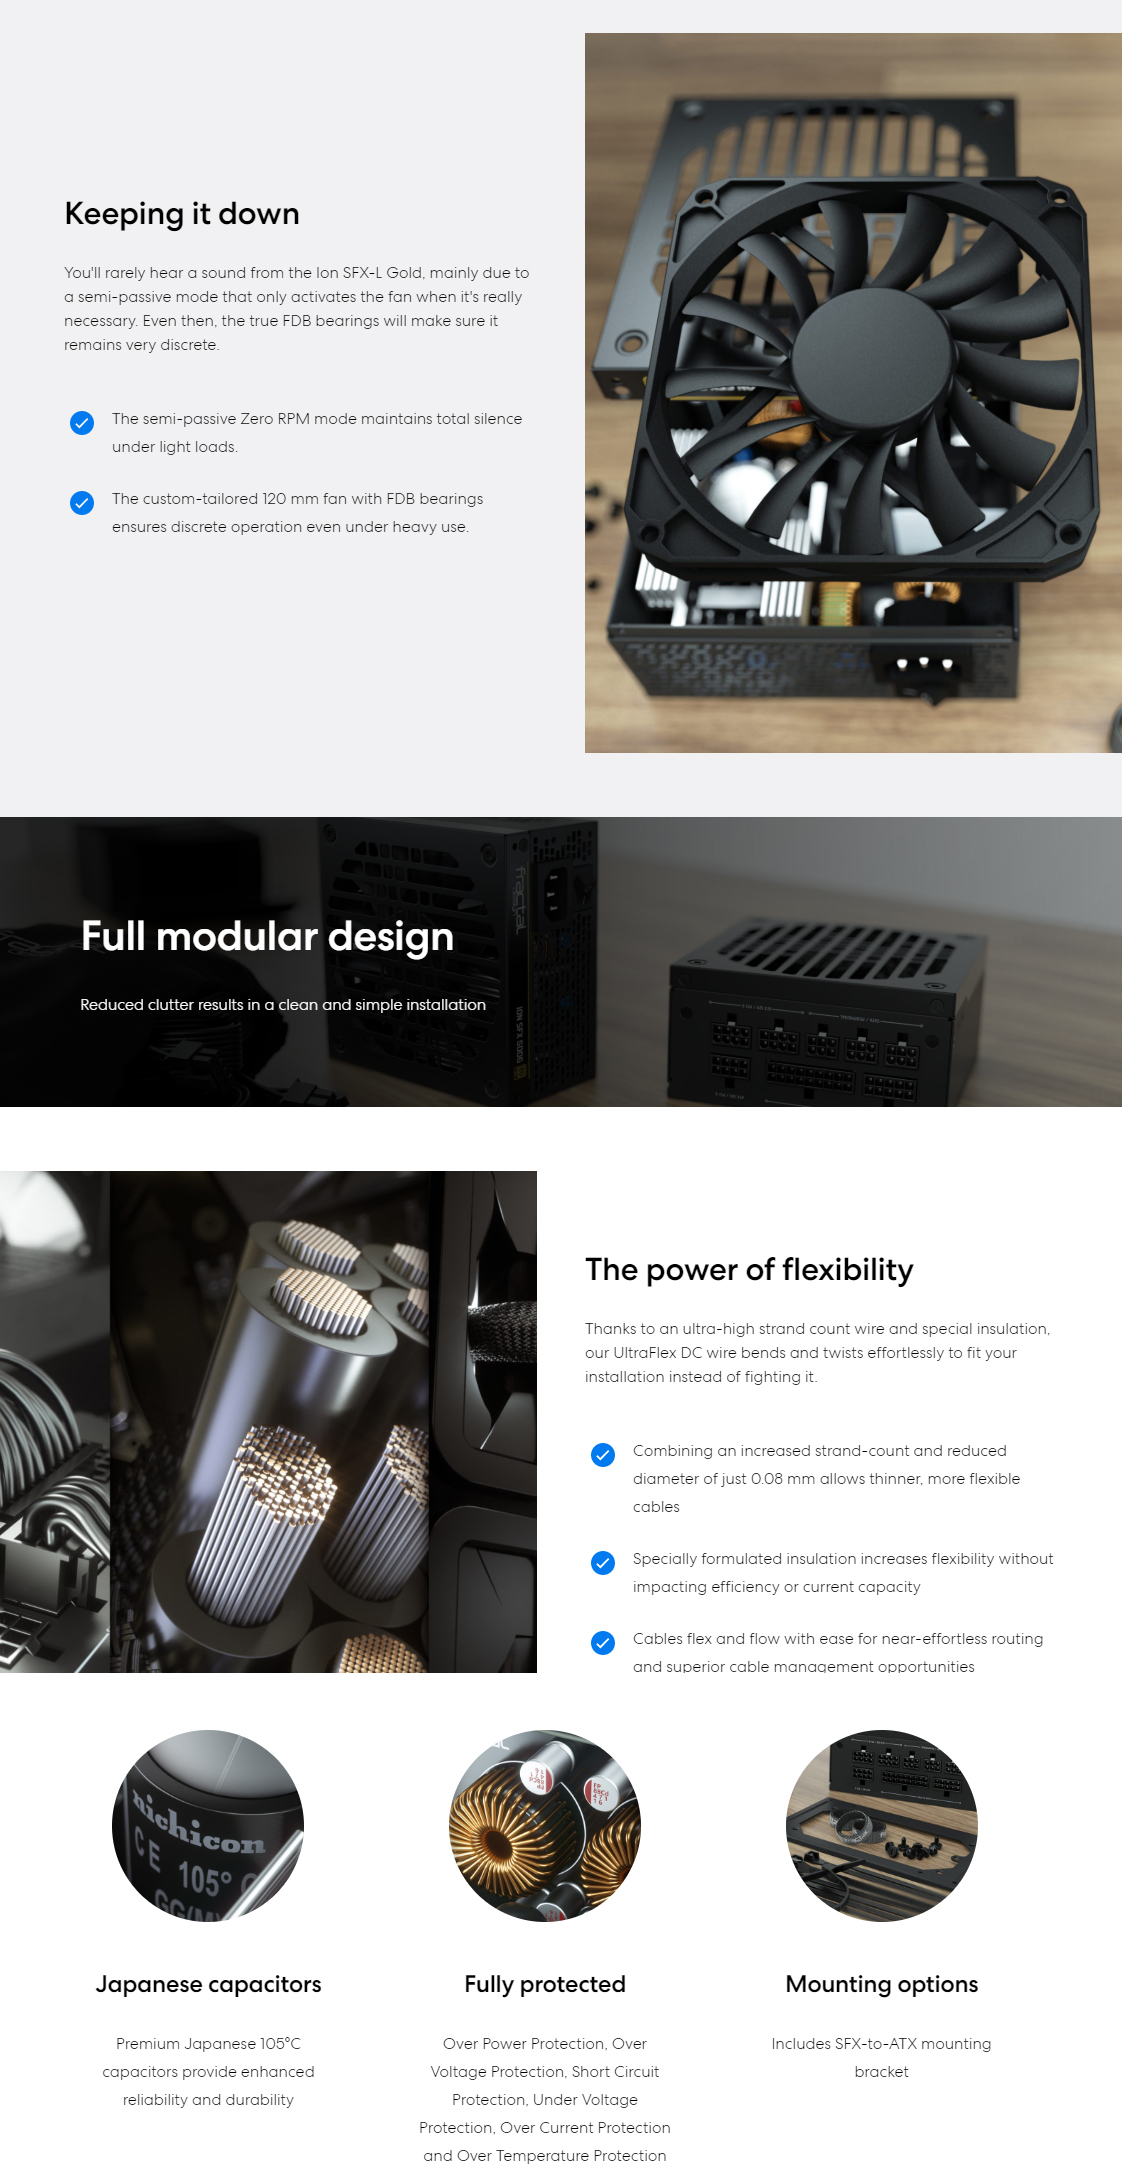 A large marketing image providing additional information about the product Fractal Design Ion 650W Gold SFX-L Modular PSU - Additional alt info not provided